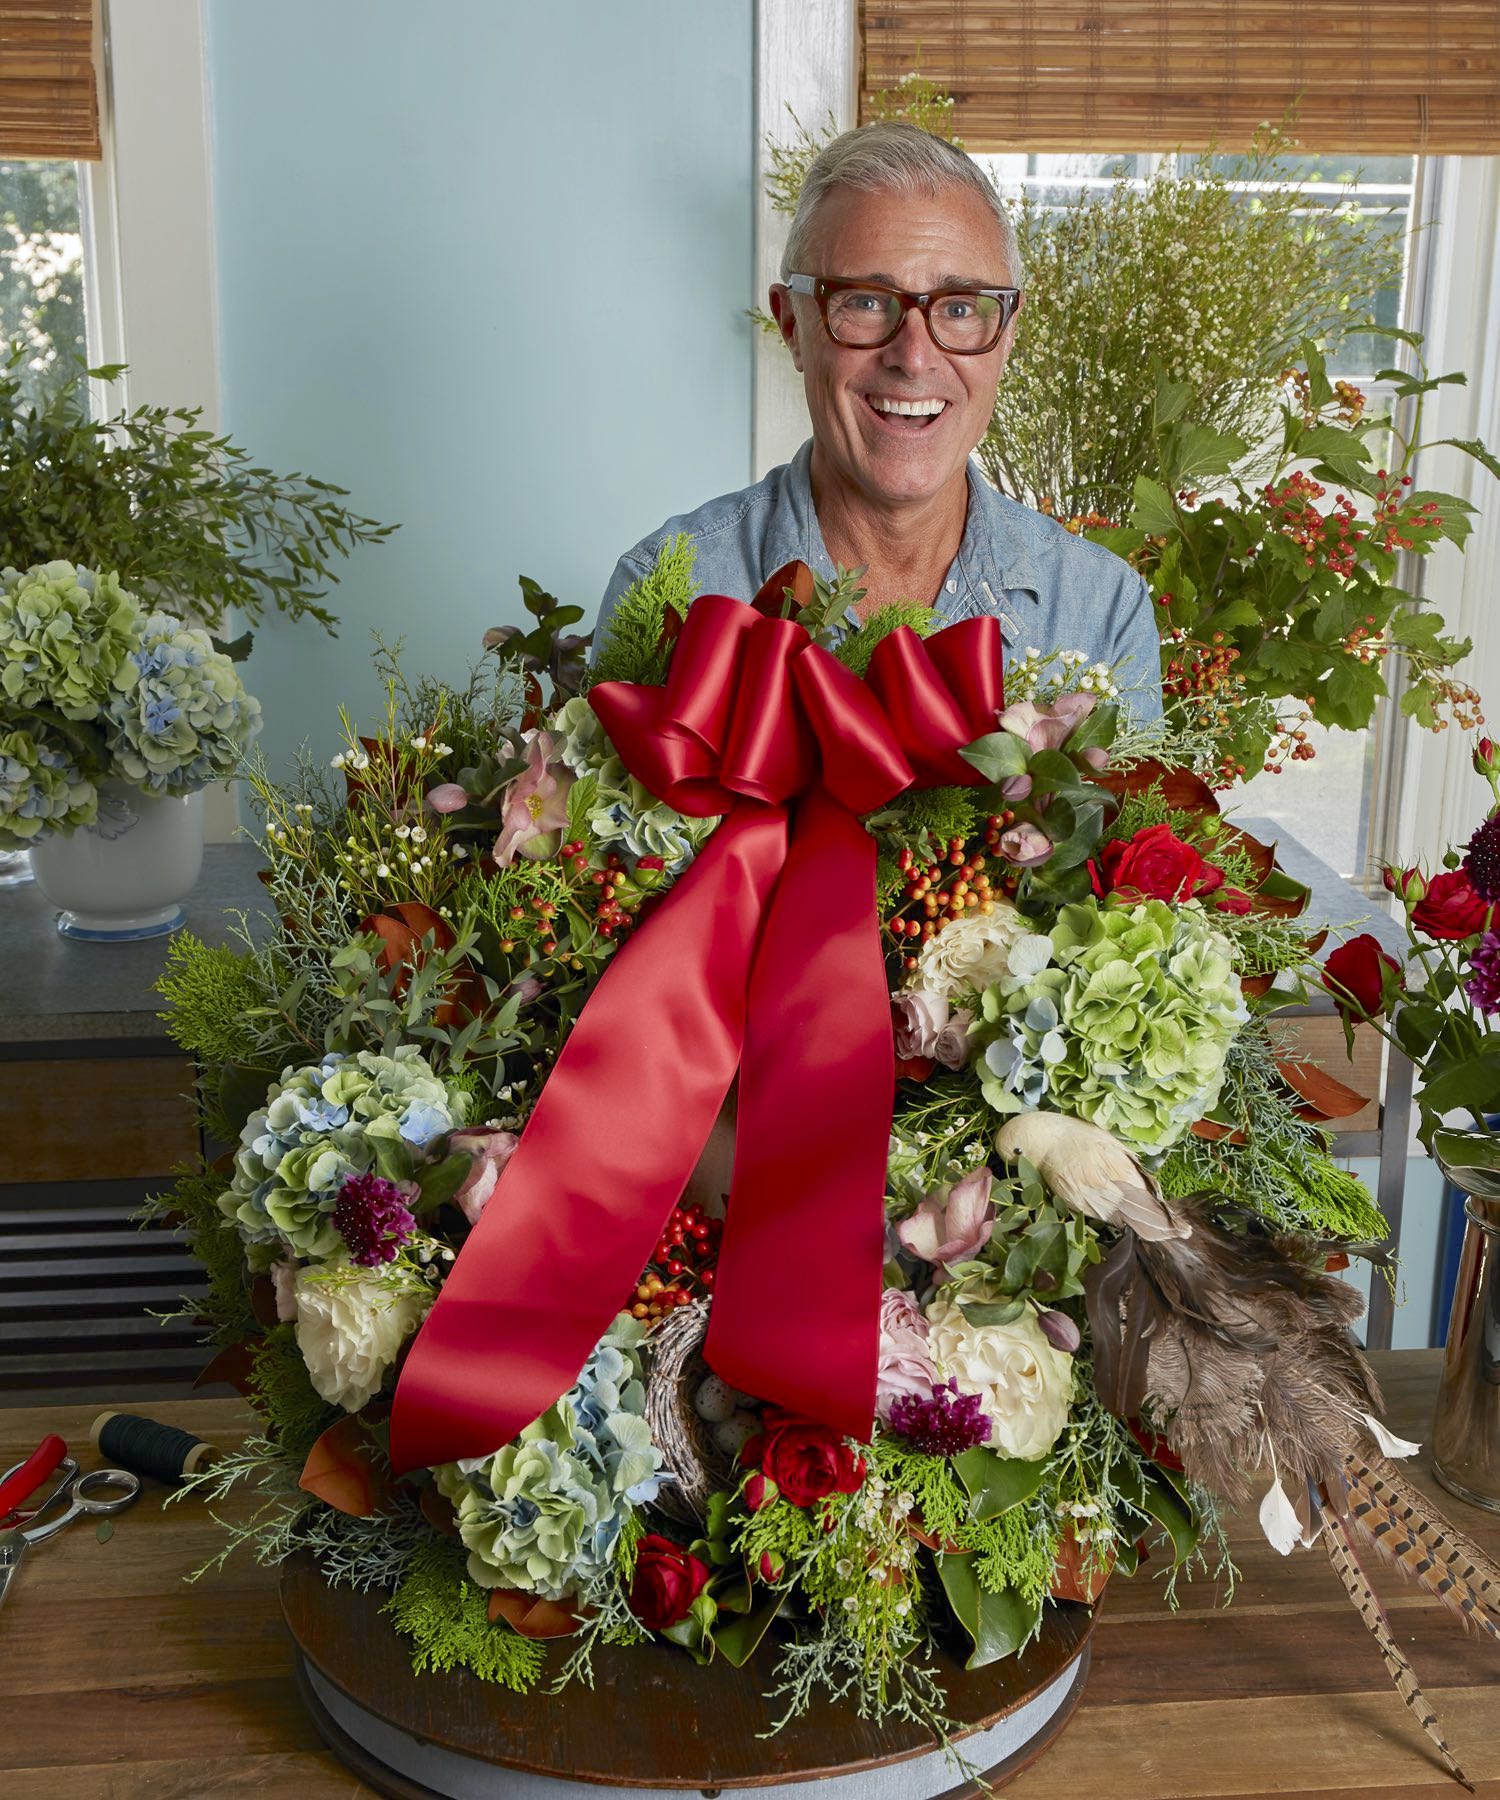 Michael Giannelli with Christmas wreath showing its red ribbon bow.